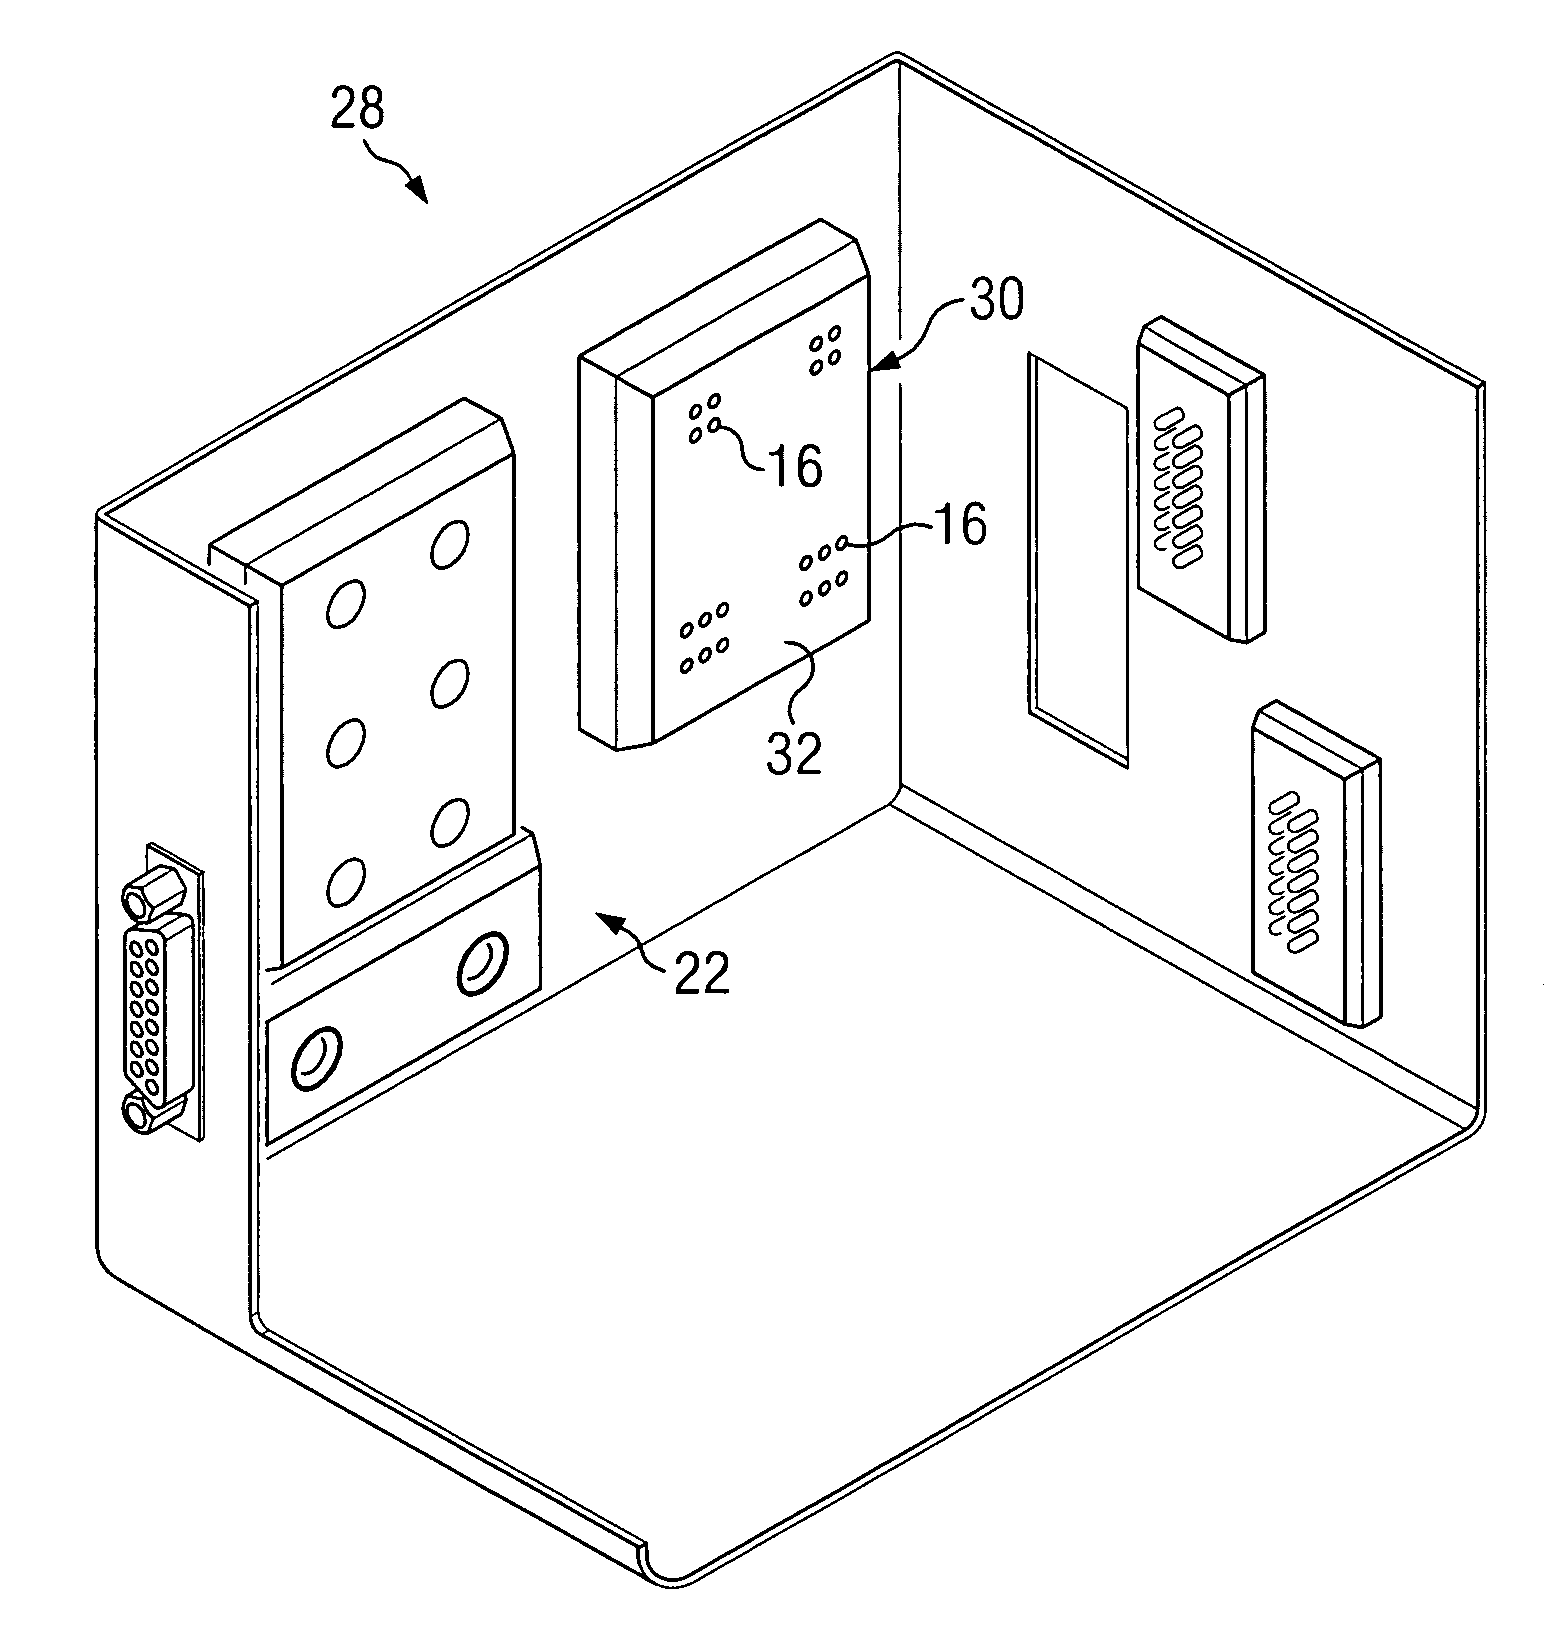 Methods and systems for rapid prototyping of high density circuits